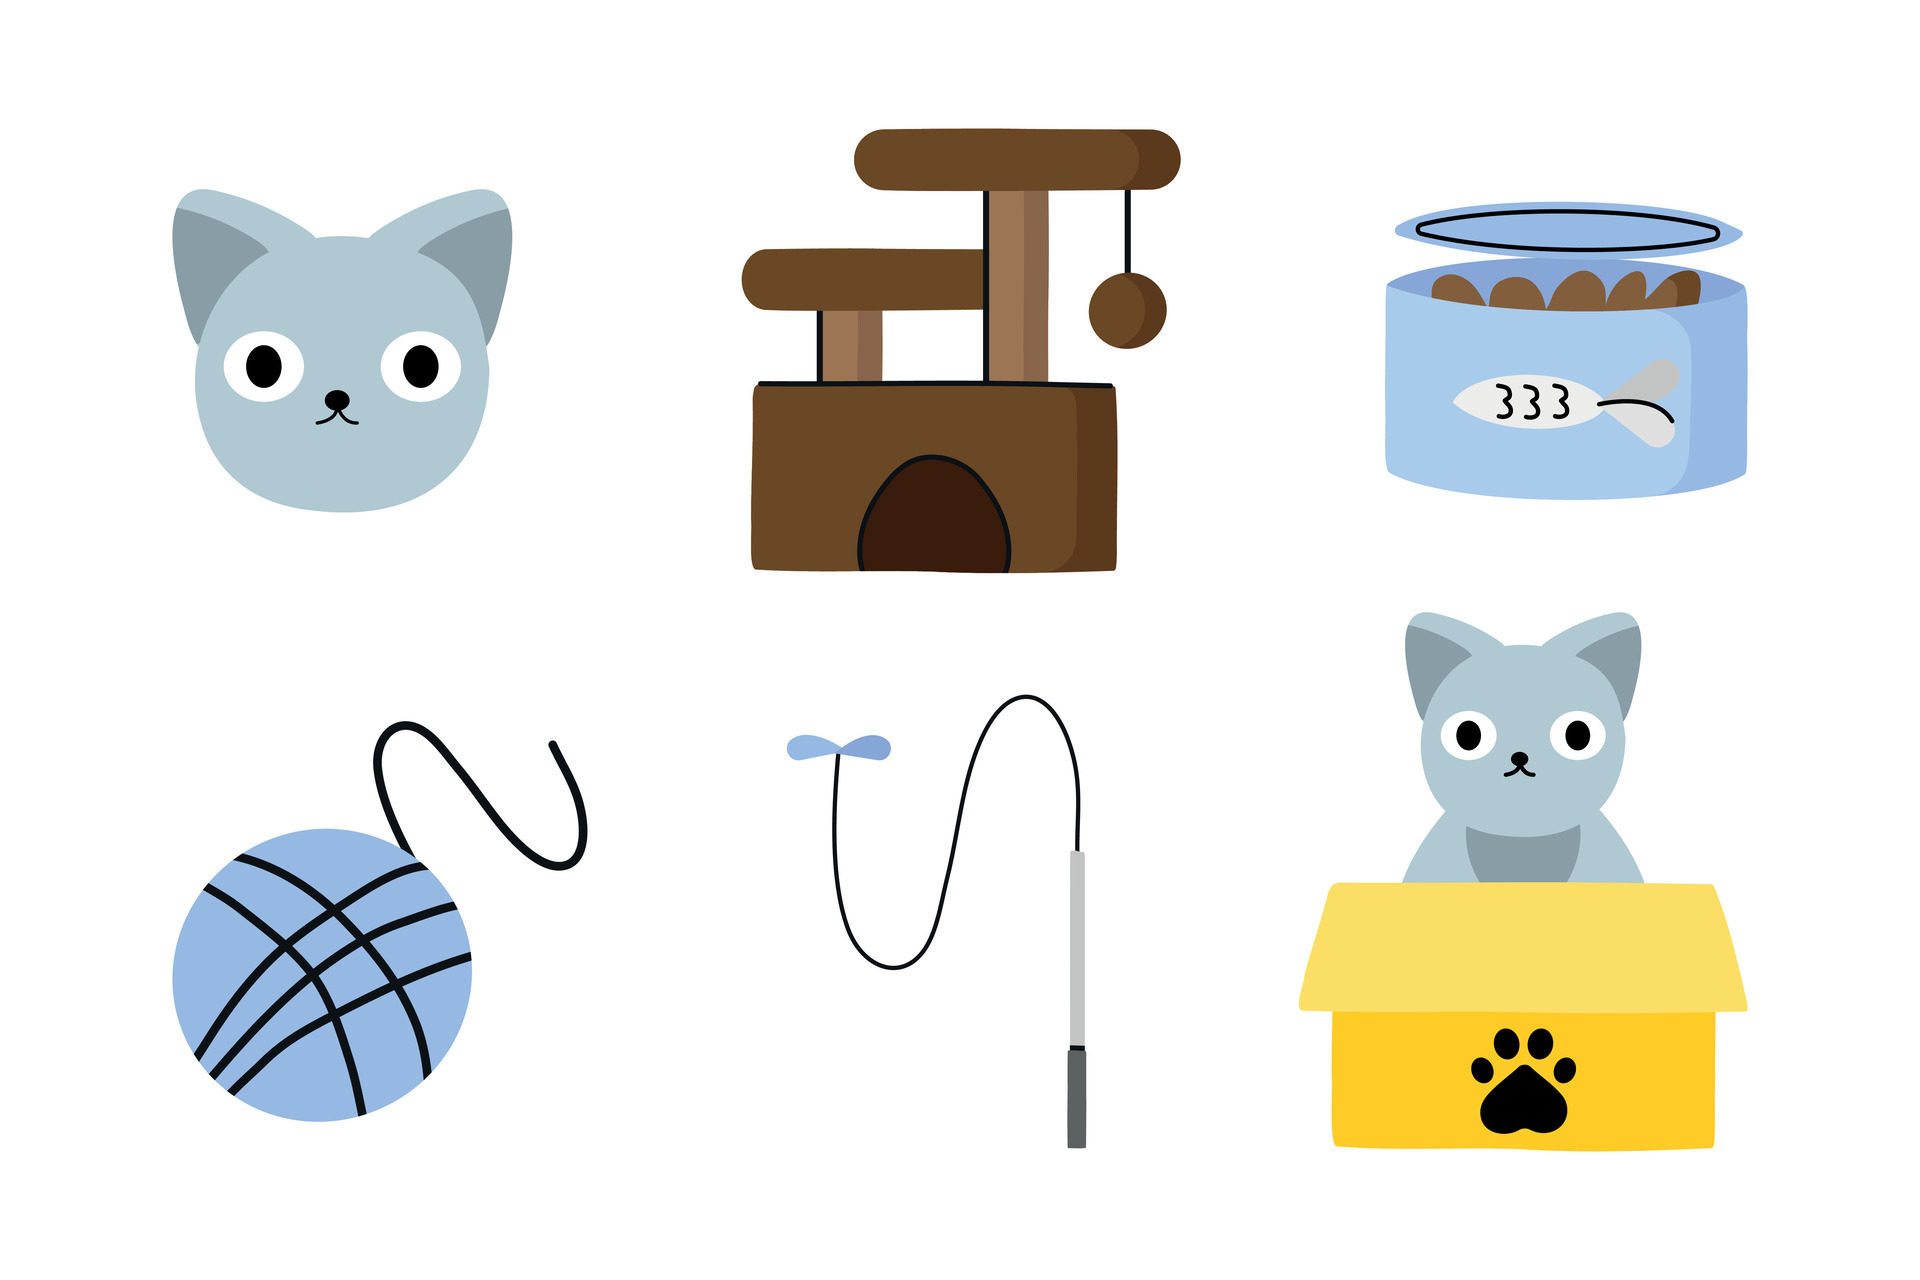 Cat icon set in flat style. vector illustration